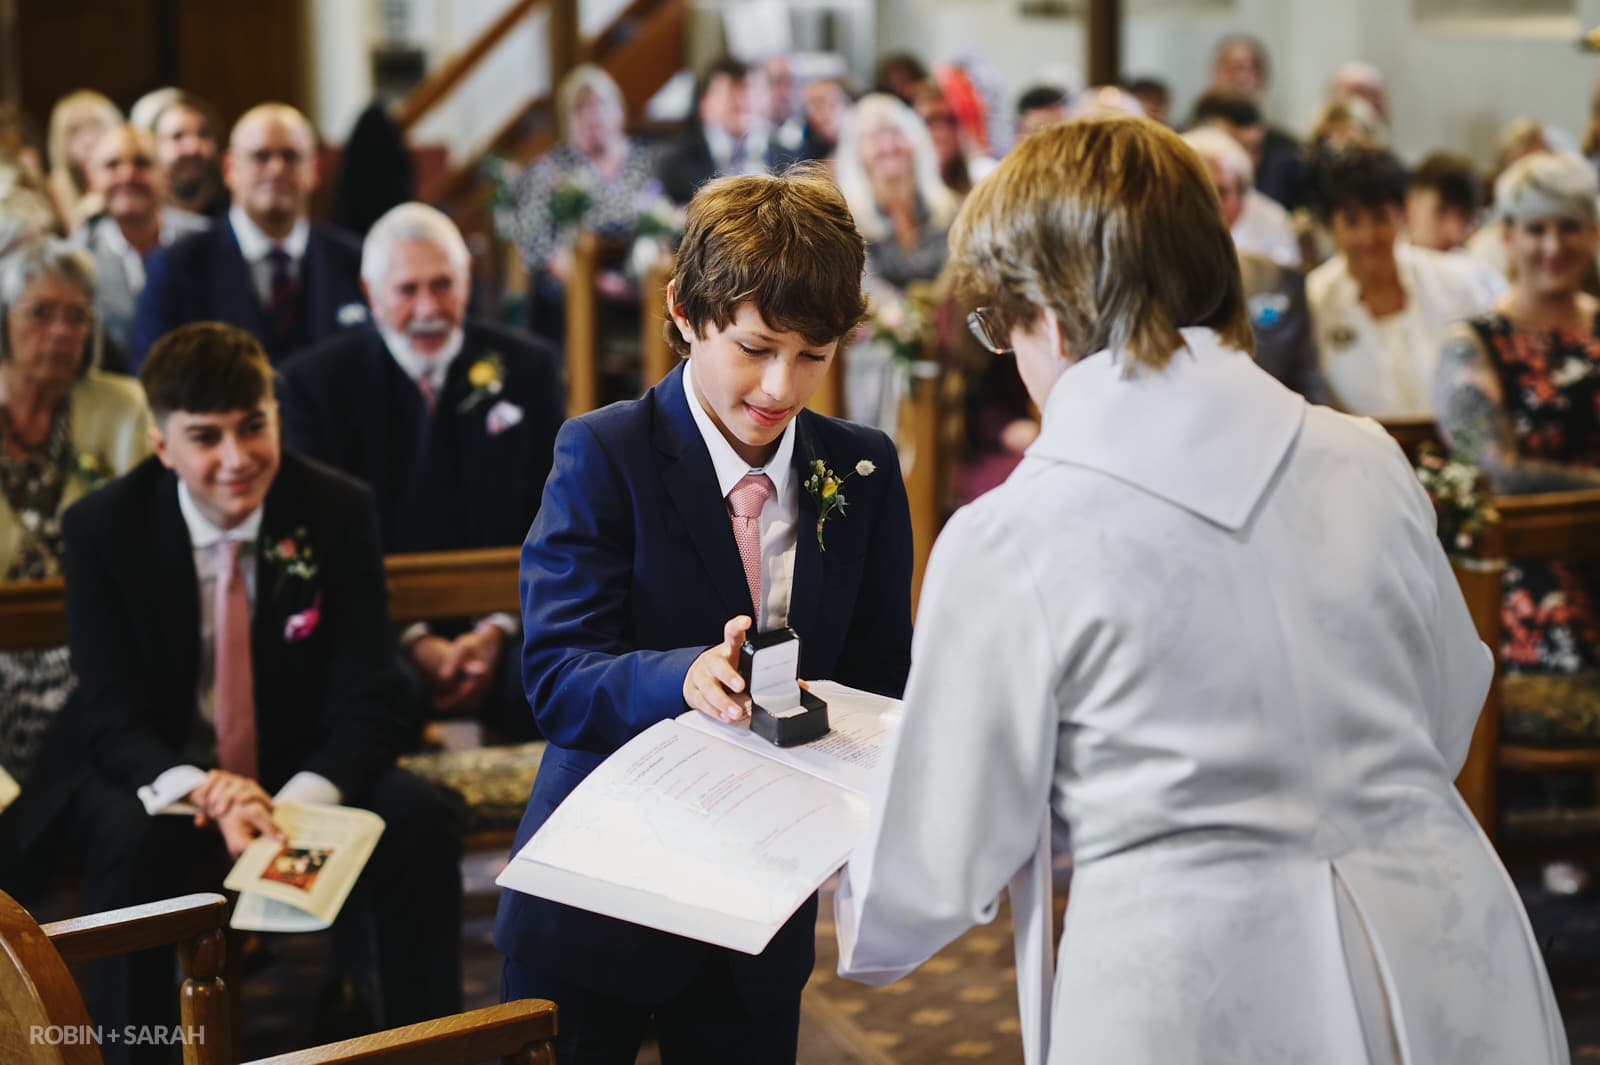 Page boy gives wedding rings to vicar during church ceremony